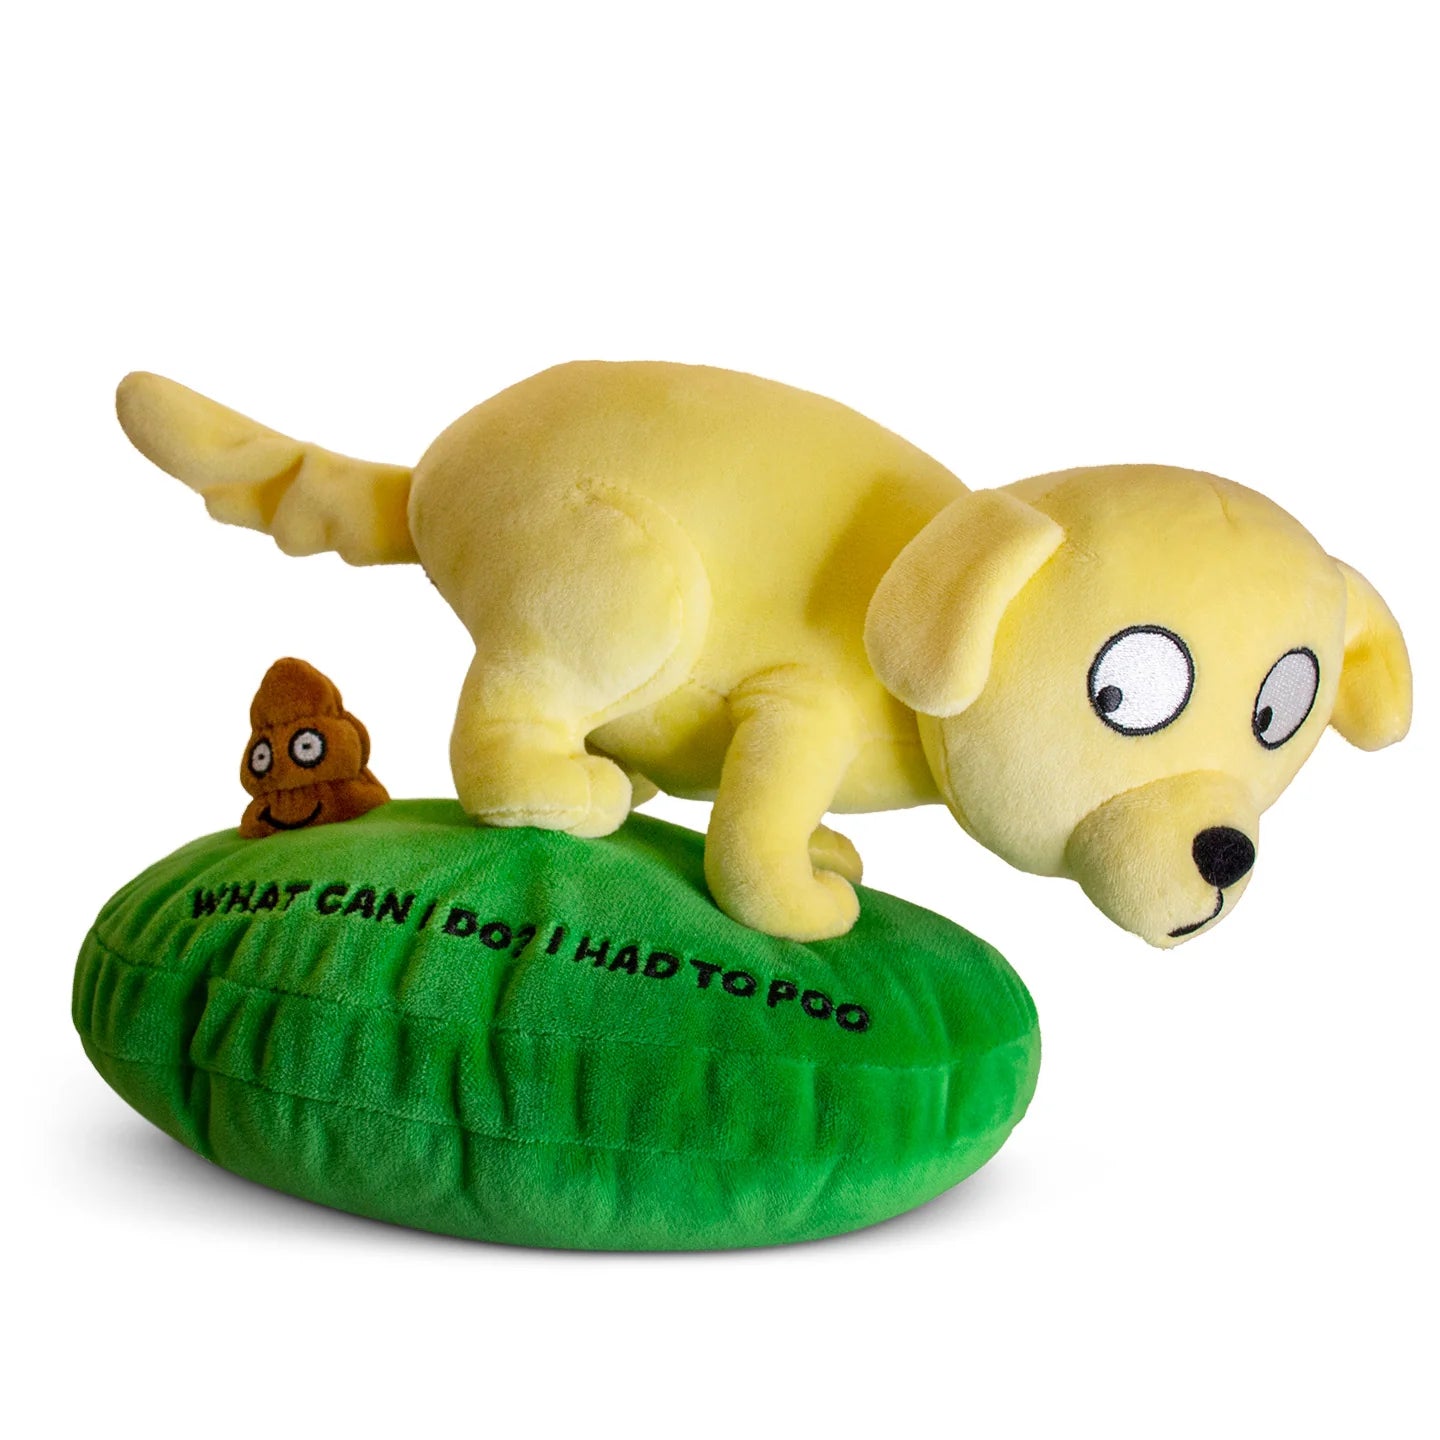 "What Can I Do? I Had to Poo" Pooping Dog Plushie